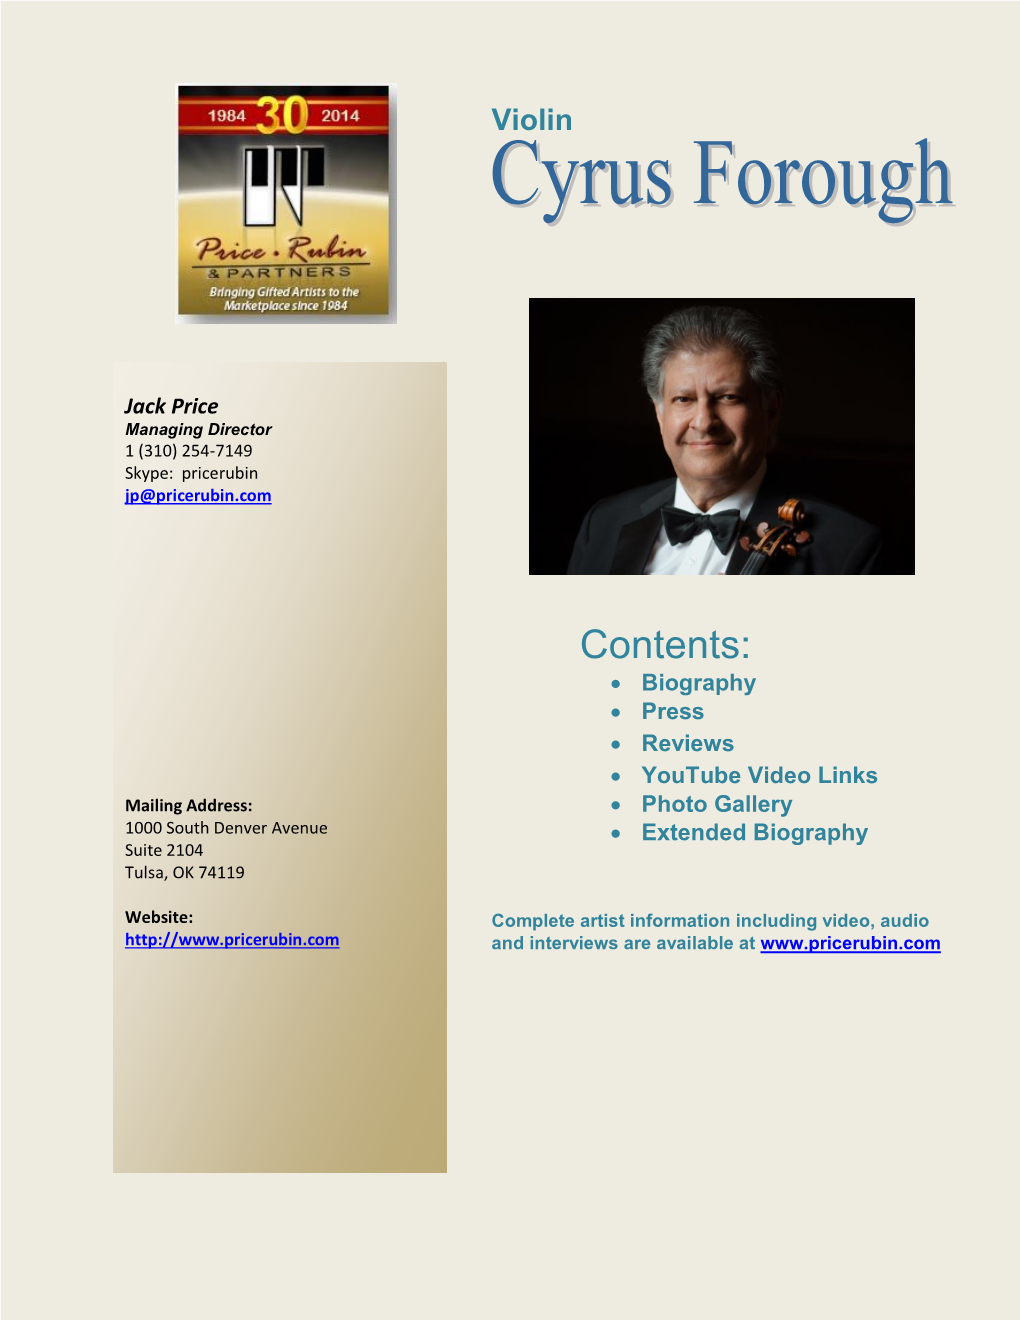 Cyrus Forough – Biography (476 Words; Suggested Version)